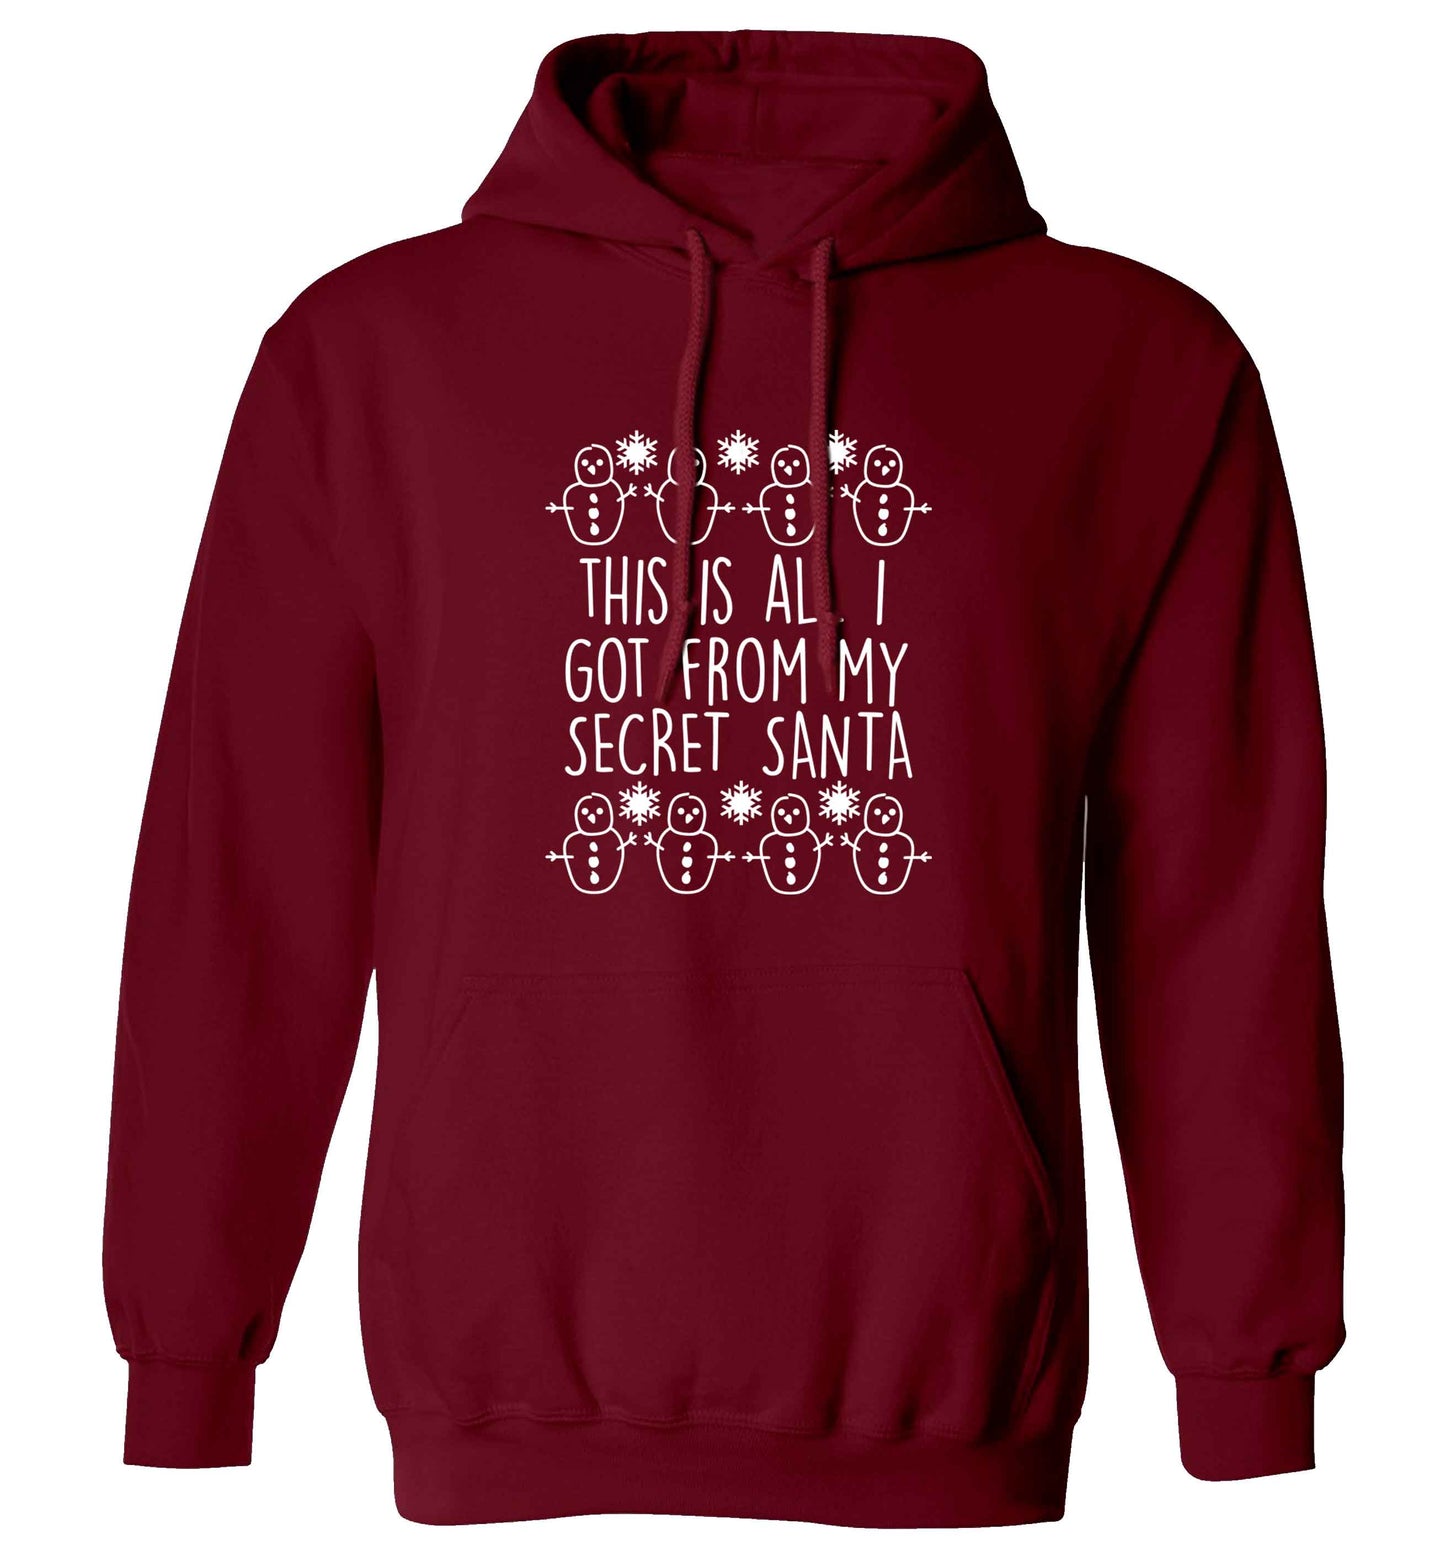 This is all I got from my secret Santa adults unisex maroon hoodie 2XL